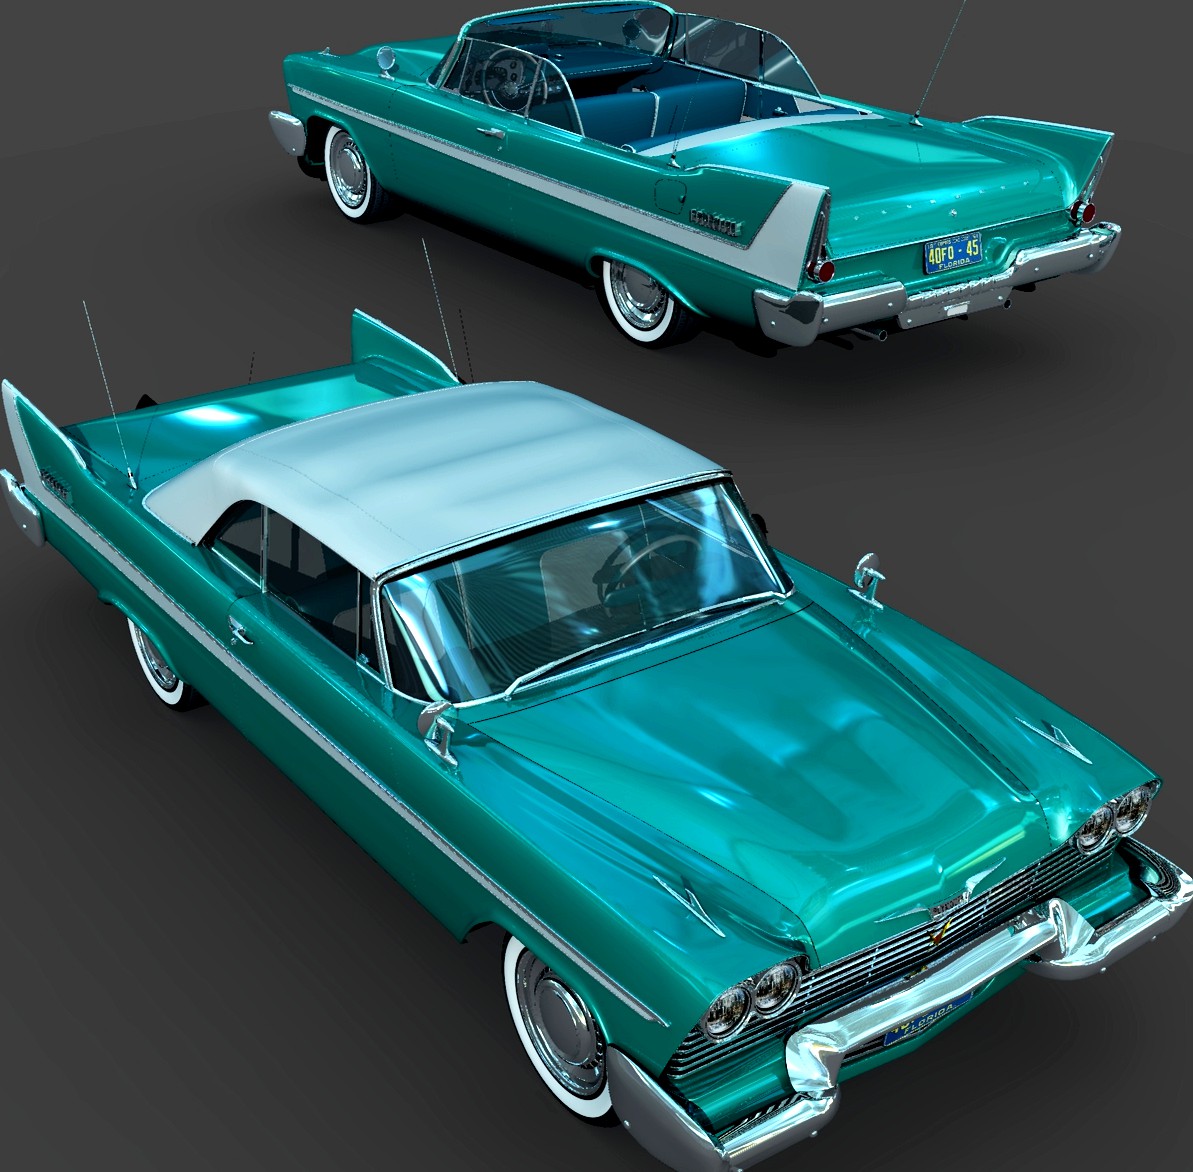 PLYMOUTH 1958 CONVERTIBLE-EXTENDED LICENSE